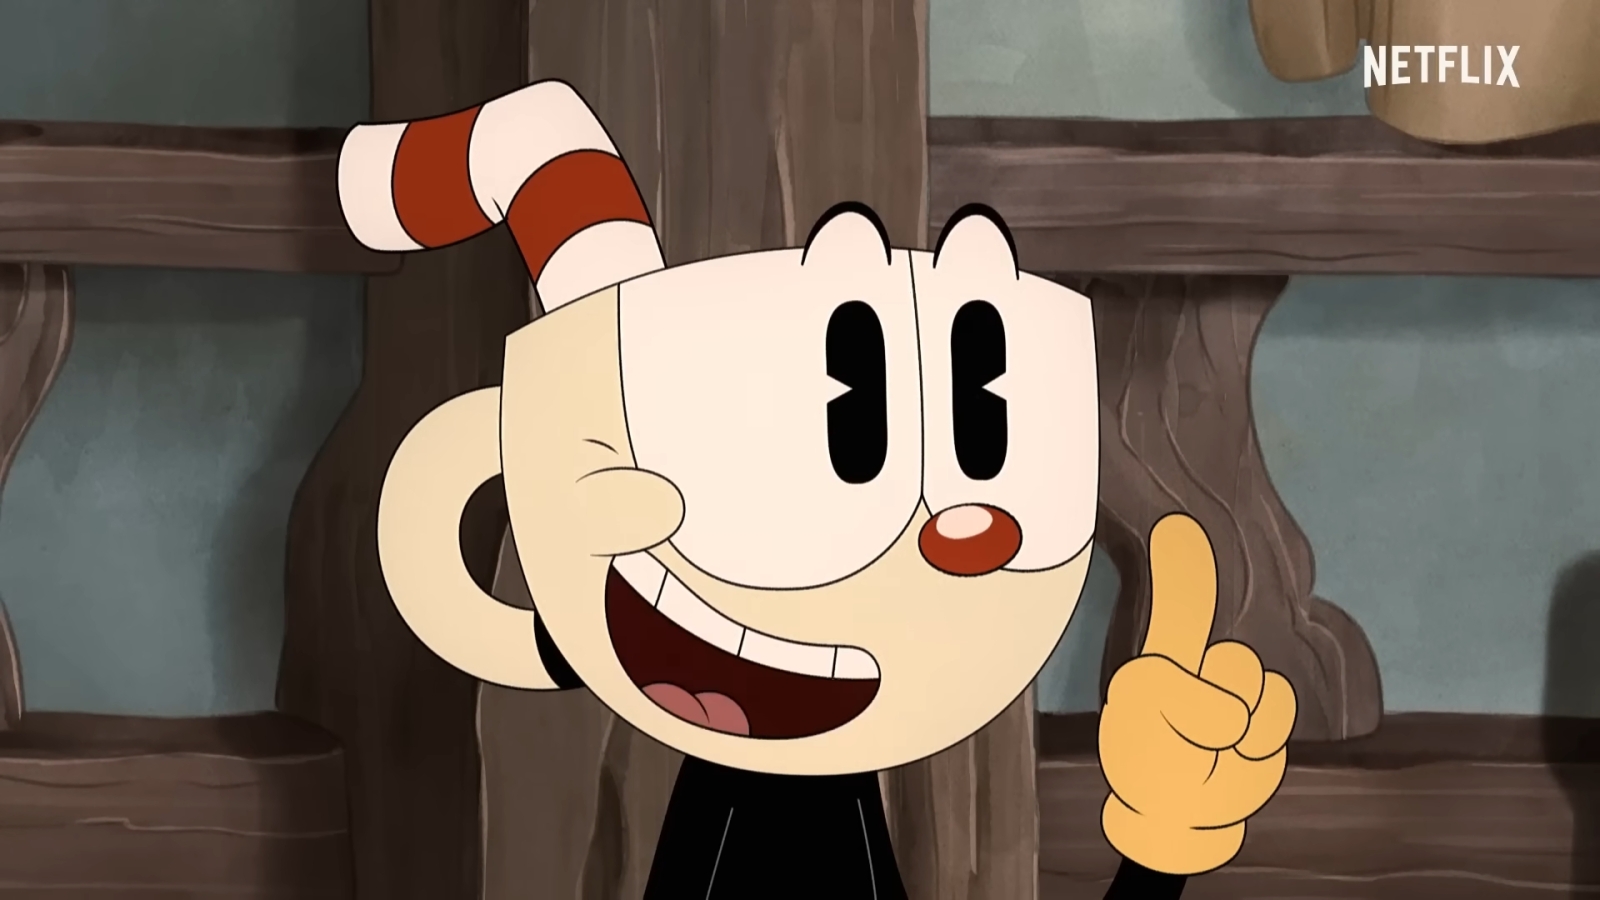 When Is the Release Date for 'The Cuphead Show' Season 2?